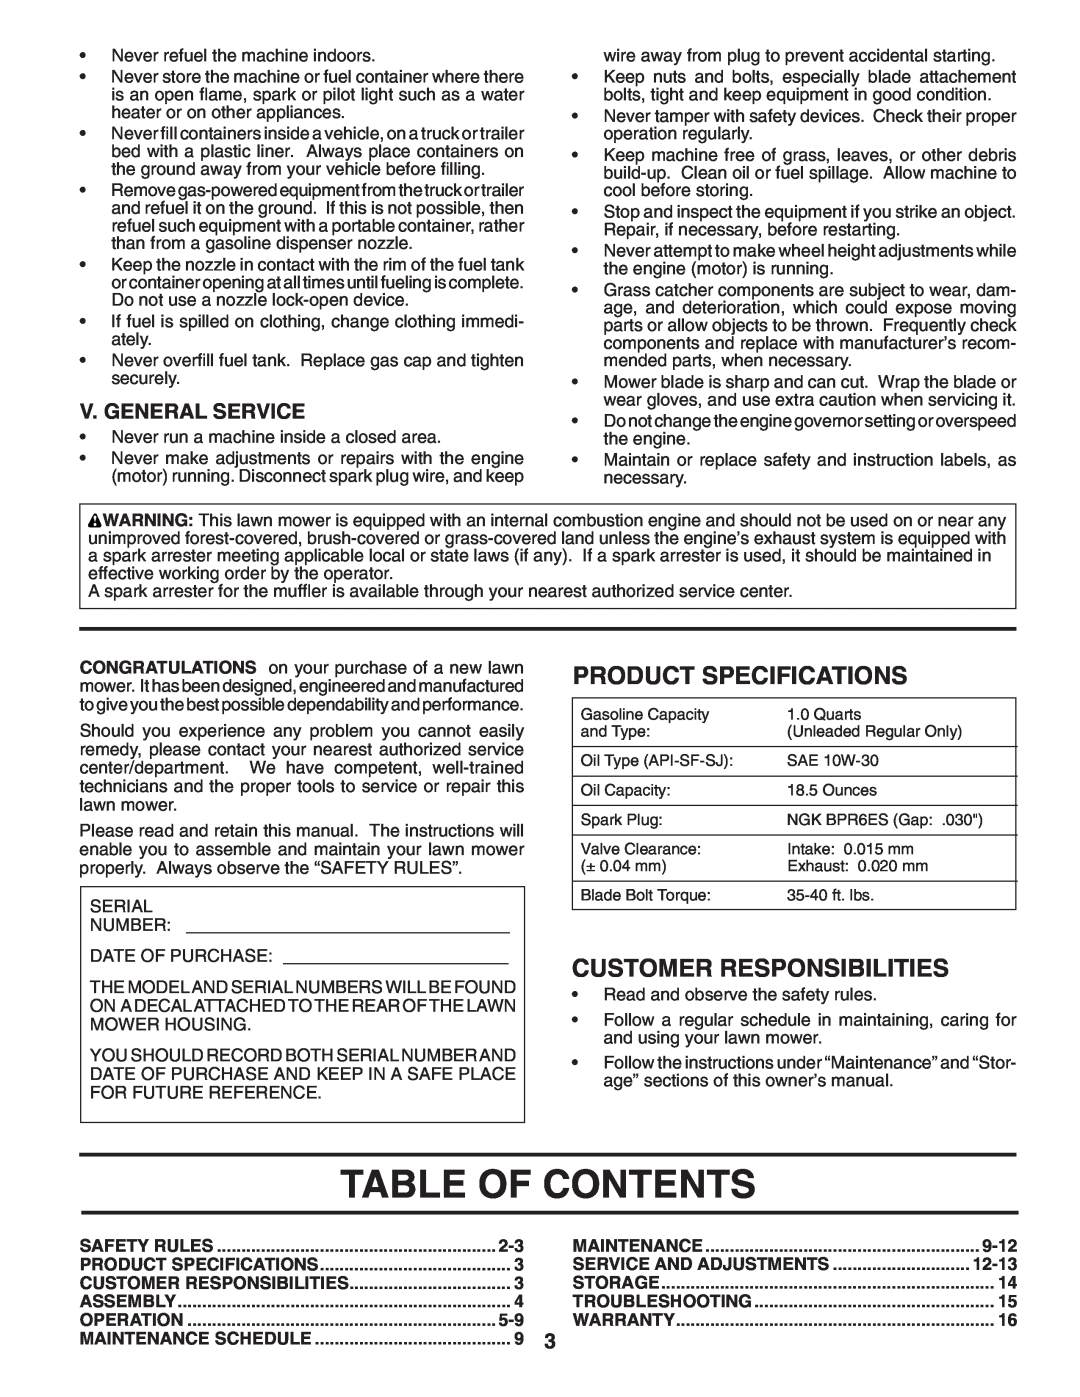 Husqvarna 7021F Table Of Contents, Product Specifications, Customer Responsibilities, V. General Service, 9-12, 12-13 